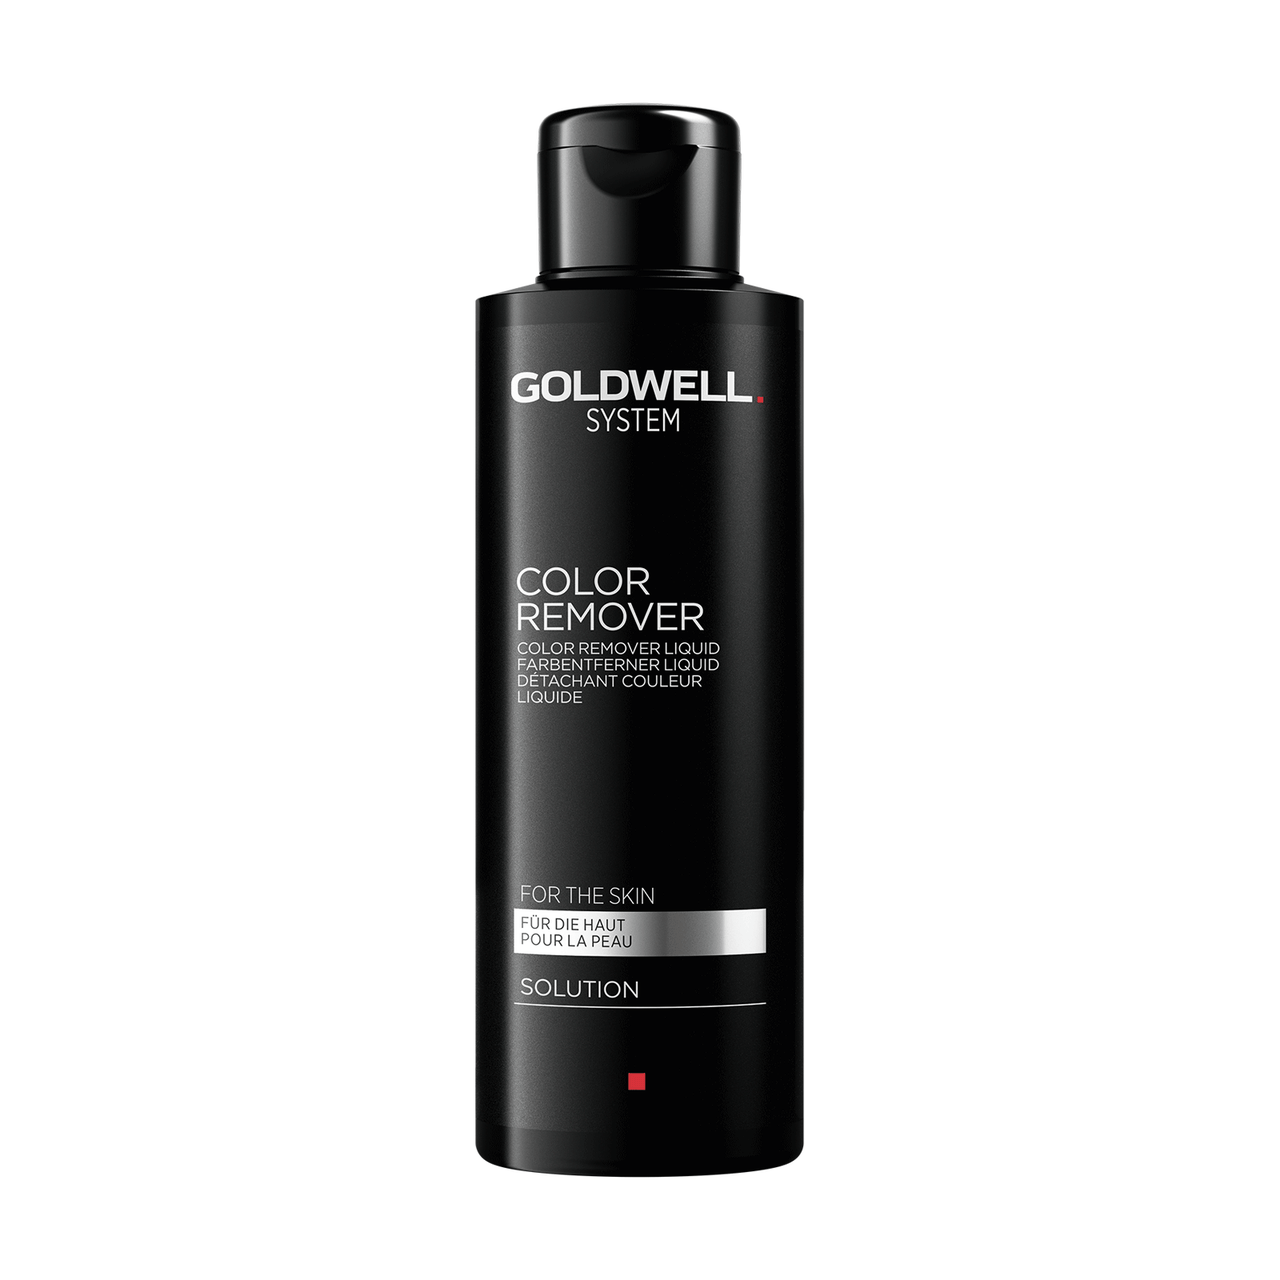 GOLDWELL_Color Remover for the skin 150ml / 5oz_Cosmetic World